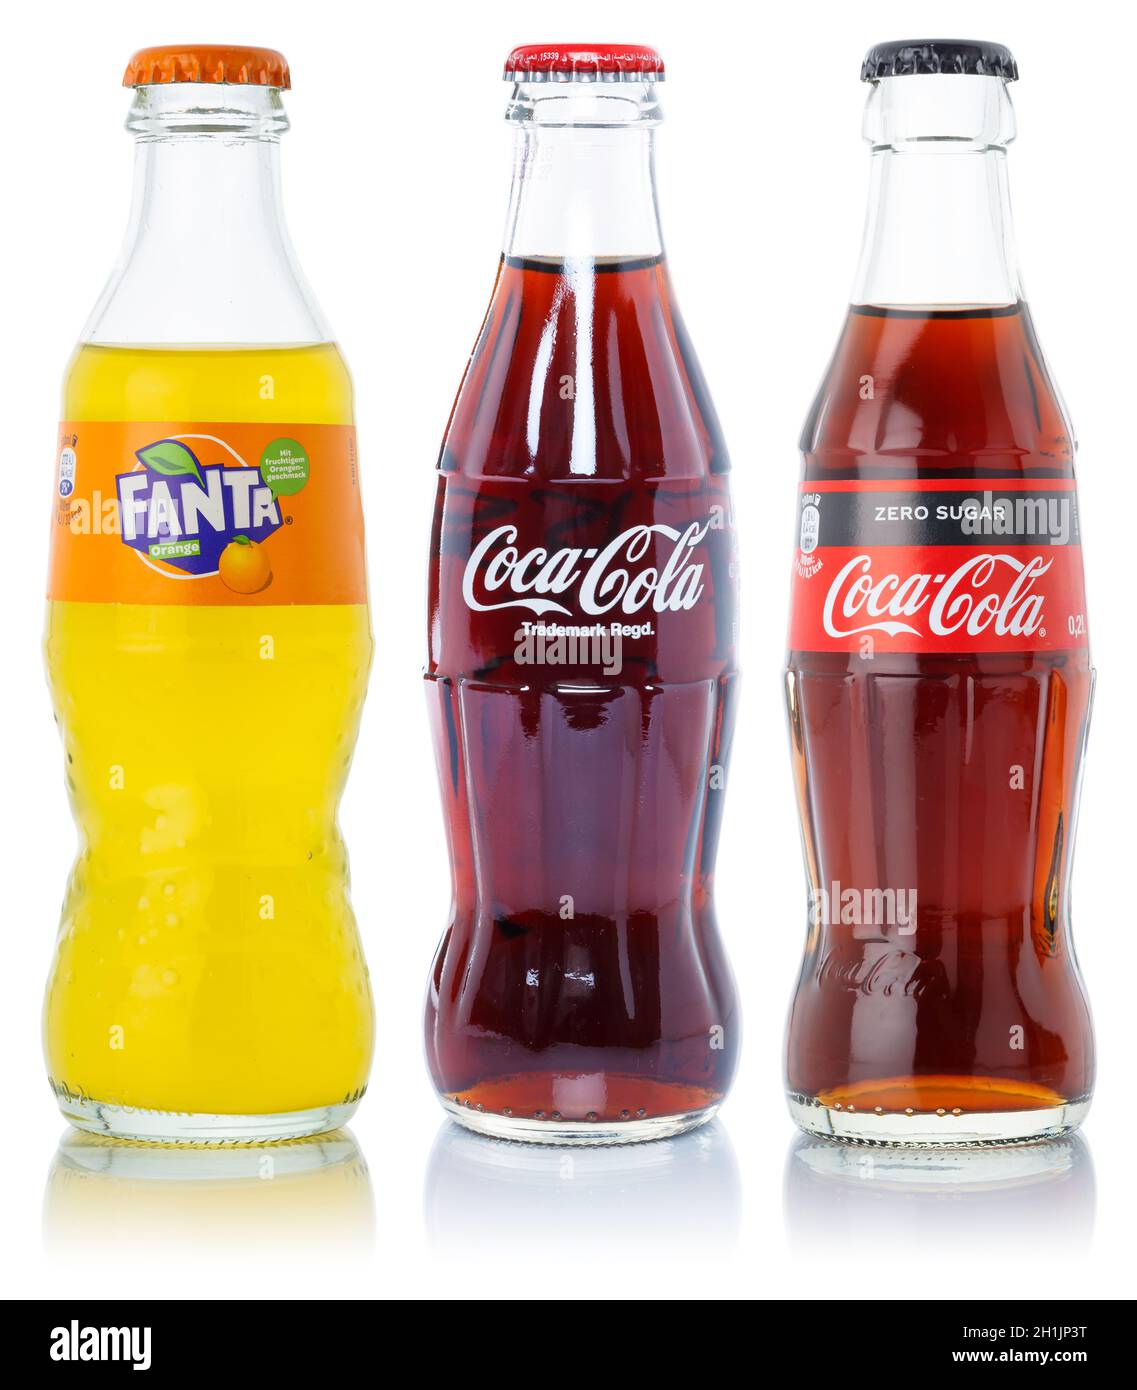 Stuttgart, Germany - August 24, 2021: Coca Cola Coca-Cola Fanta products  lemonade drinks in bottles isolated on a white background in Stuttgart,  Germa Stock Photo - Alamy